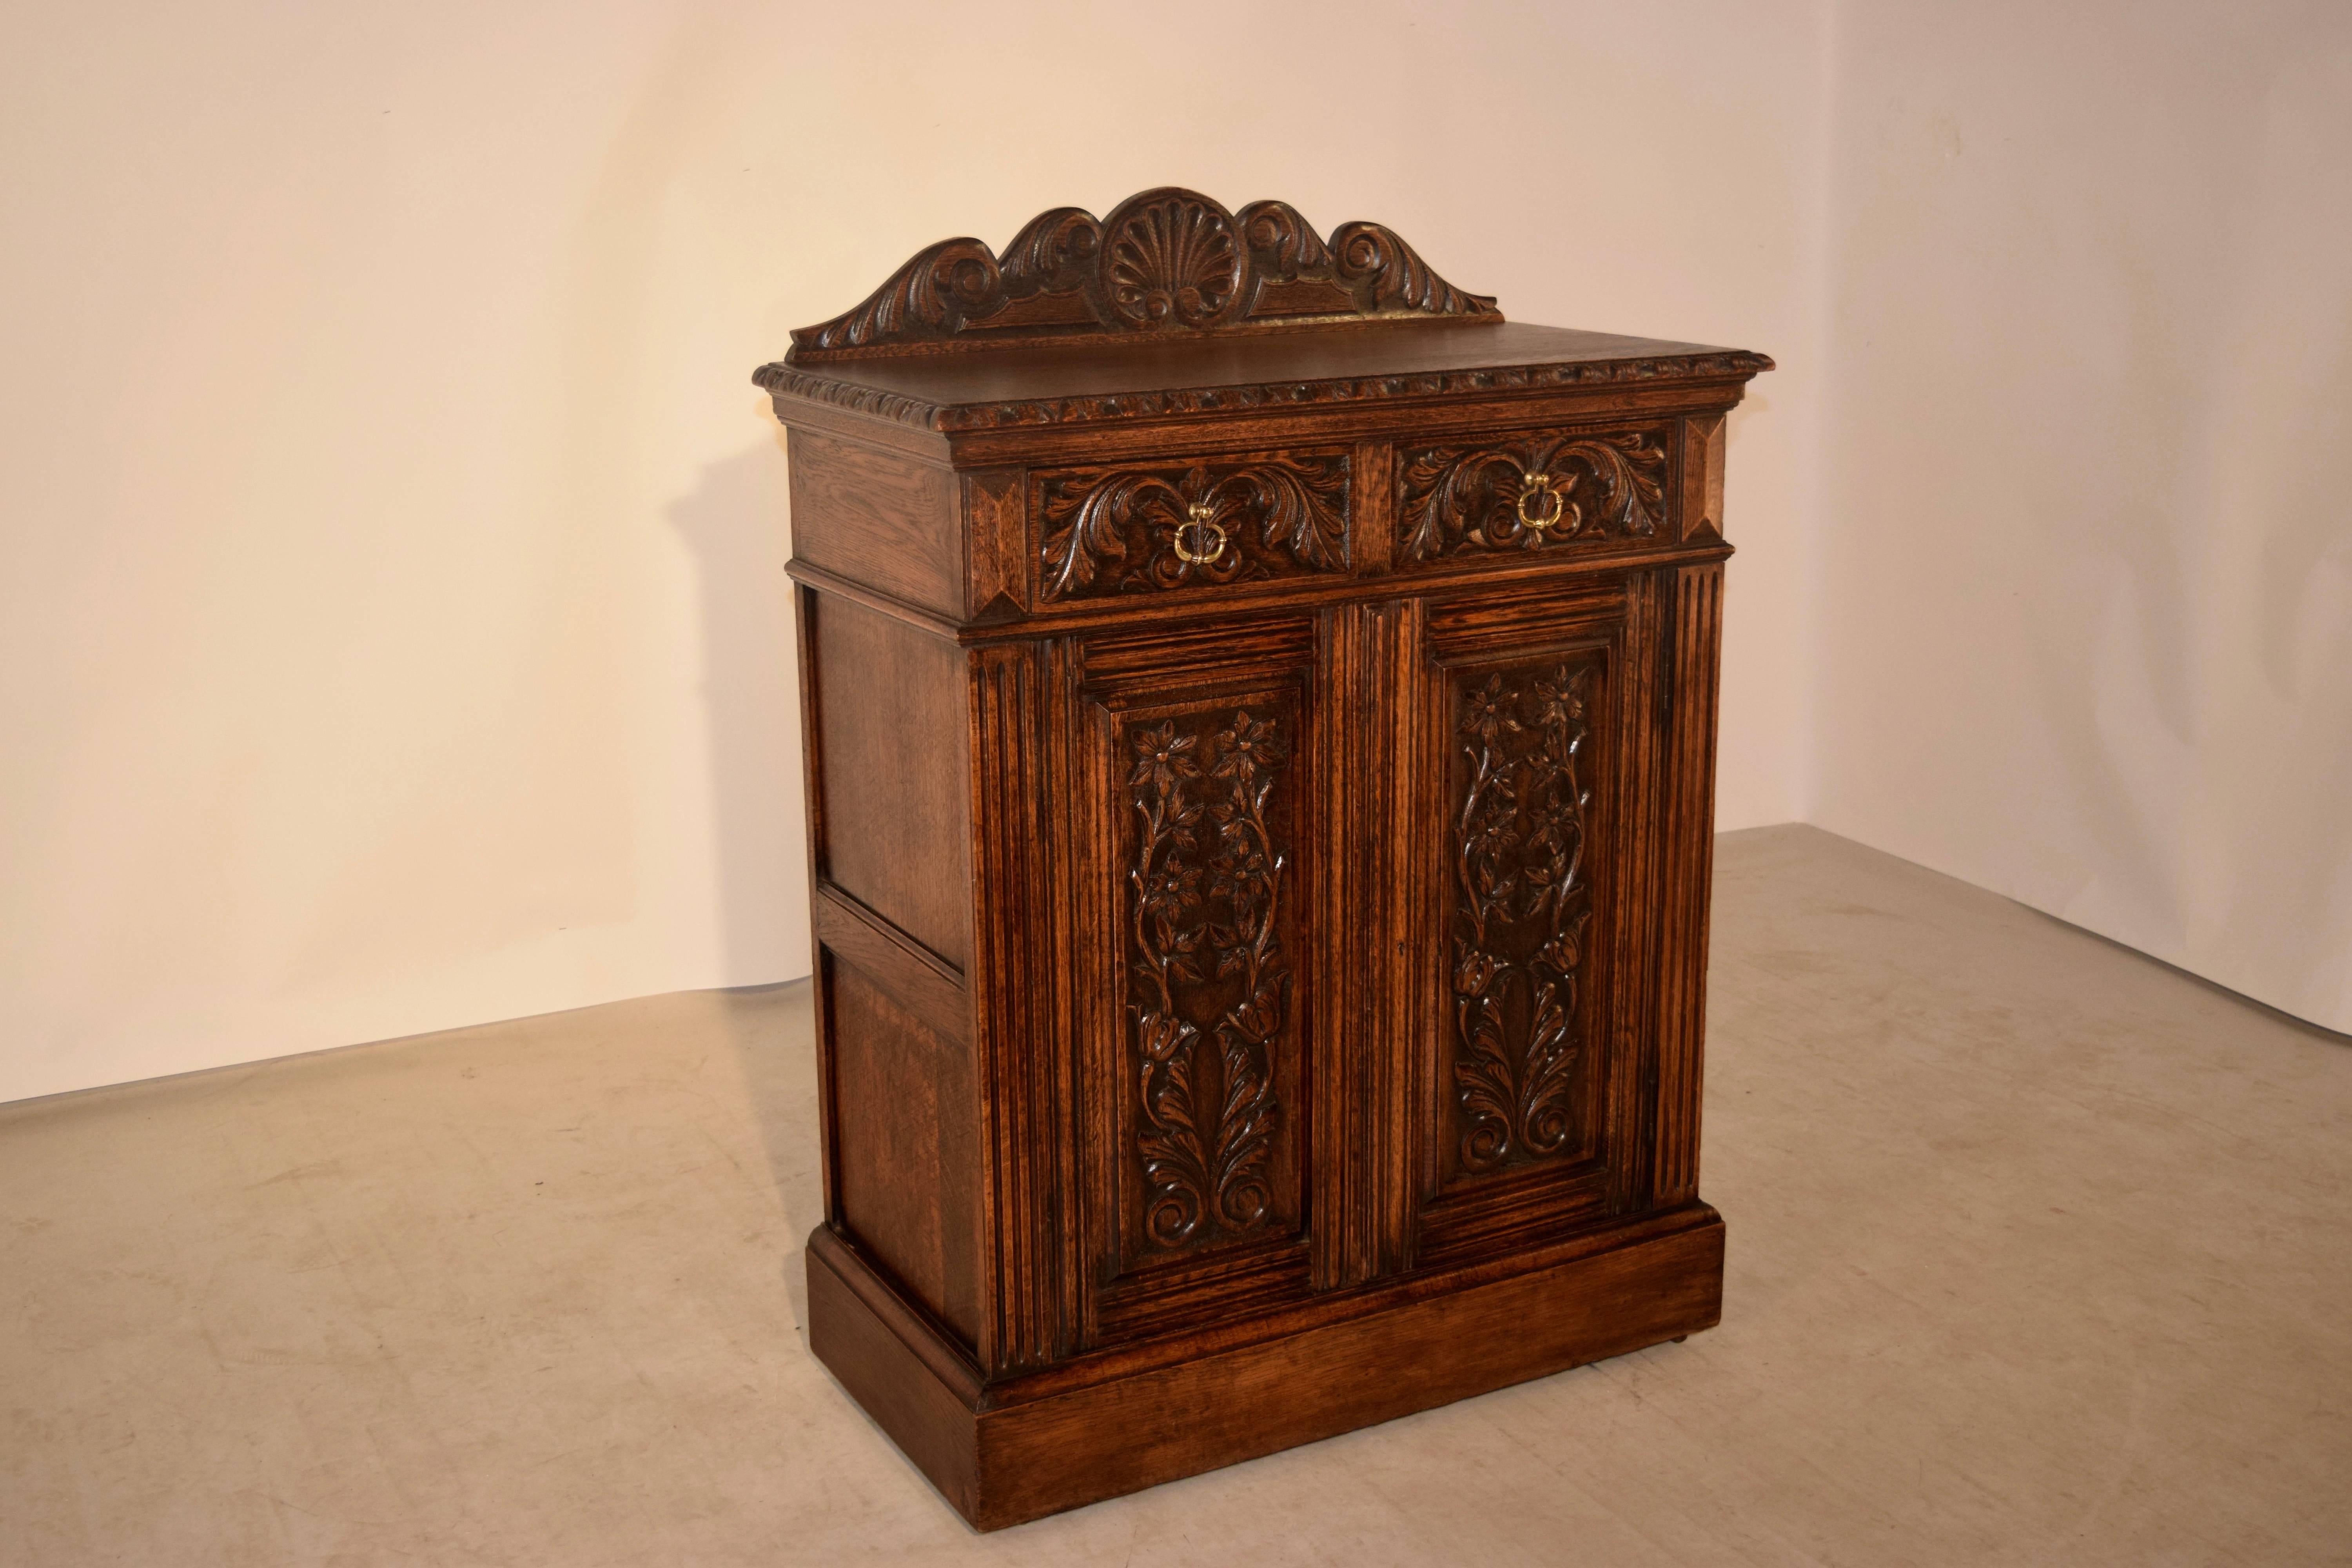 19th Century English Carved Cupboard (Englisch)